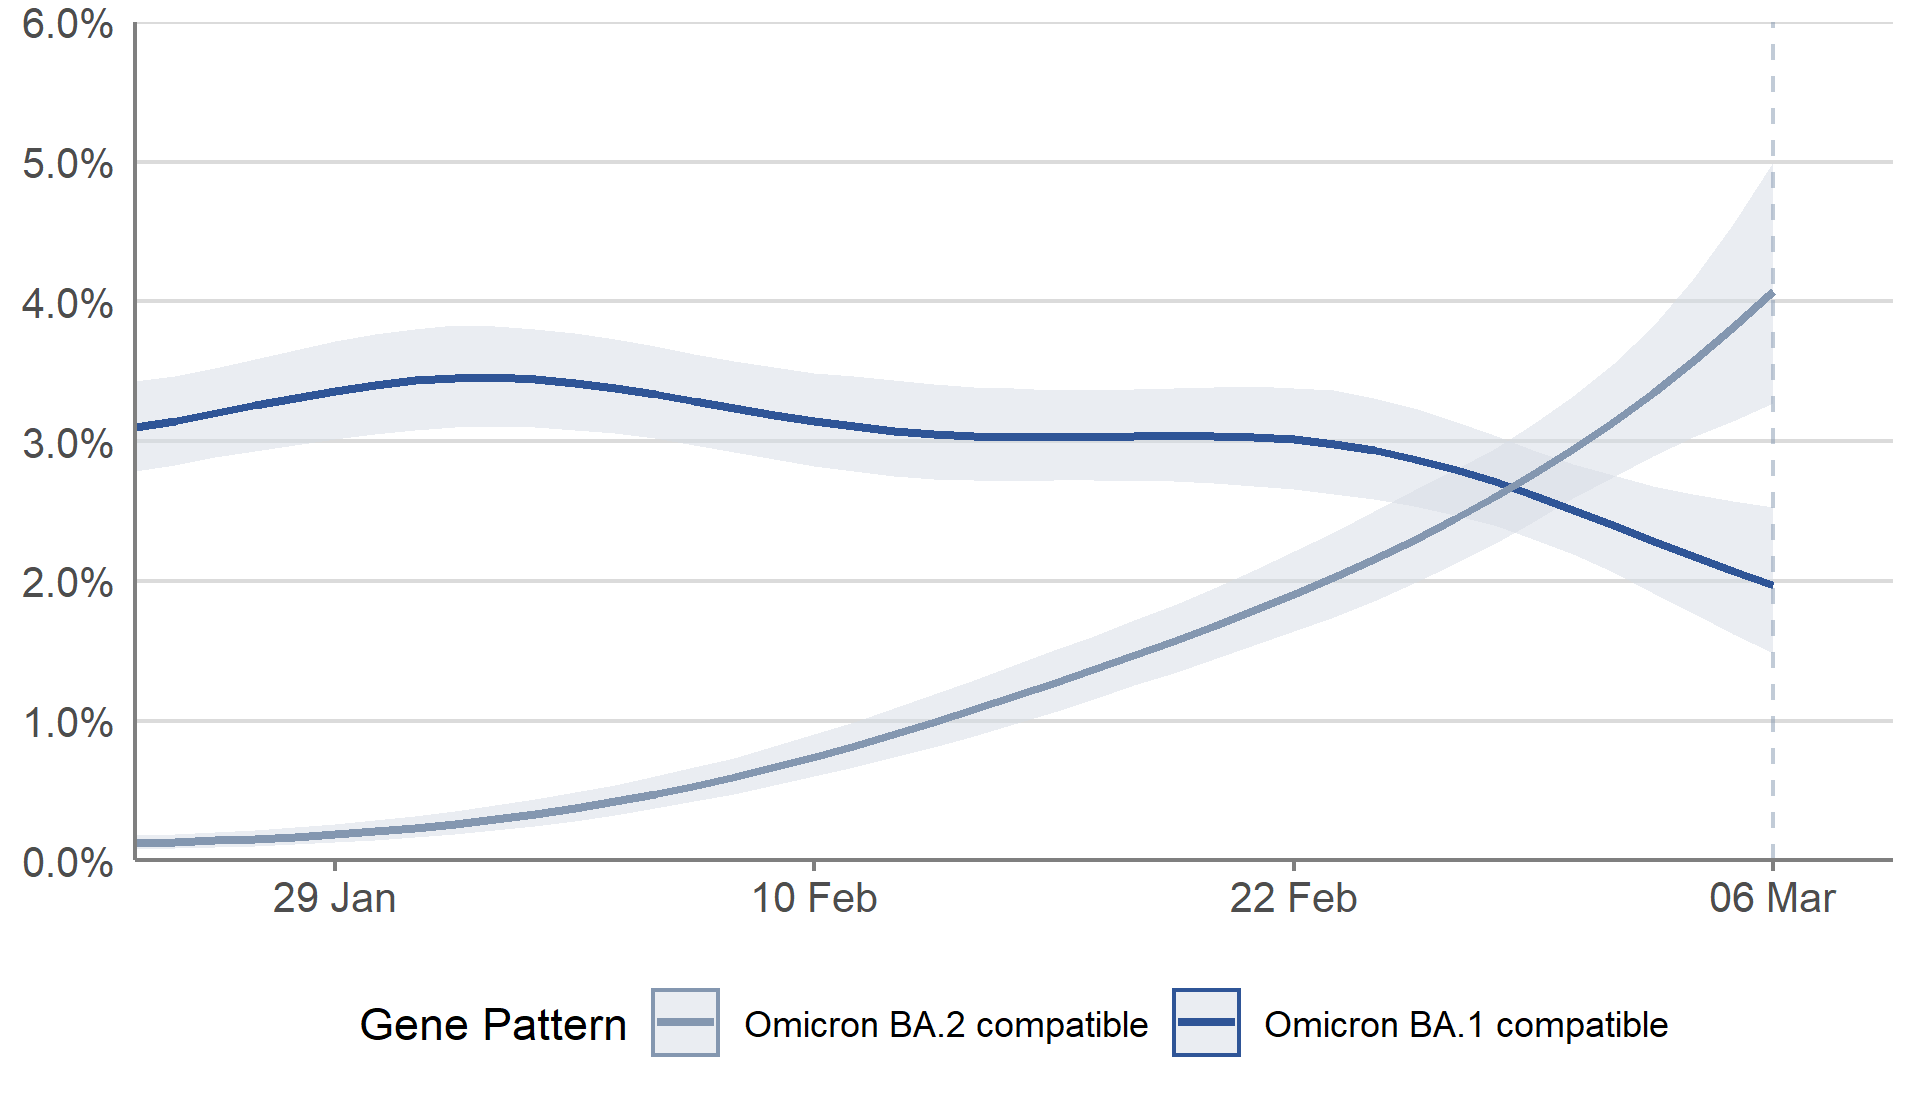 In Scotland, the percentage of people testing positive with cases compatible with Omicron BA.2 has increased in the most recent week. The percentage of people testing positive with cases compatible with Omicron BA.1 has decreased in the week to 6 March 2022.